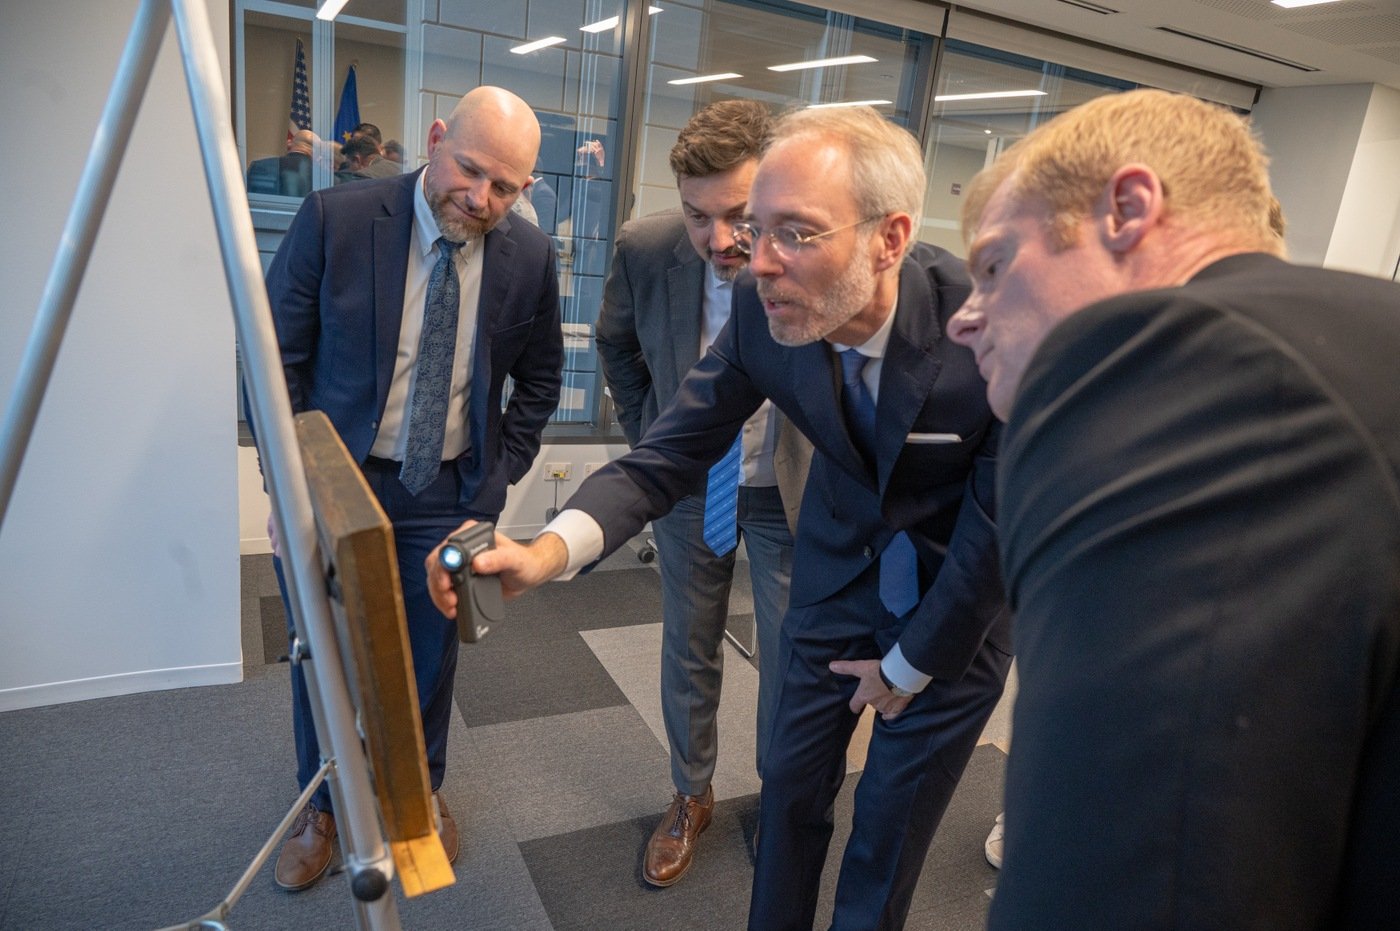 From left: FBI Chicago Assistant Special Agent in Charge Eric Shiffman; German Consul General Michael Ahrens; Dr. Bernd Ebert, head of the Dutch and German Baroque Painting Collections at the Alte Pinakothek museum; and and FBI Chicago Special Agent Benjamin Milligan examine the painting "Landschaft italienischen Charakters" (or "Landscape of Italian Character") by the Austrian painter Johann Franz Nepomuk Lauterer at the Consulate General of the Federal Republic of Germany in Chicago on October 19, 2023.

That day, the FBI’s Art Crime Team in Chicago returned the painting to its rightful owner during a ceremony at the consulate.